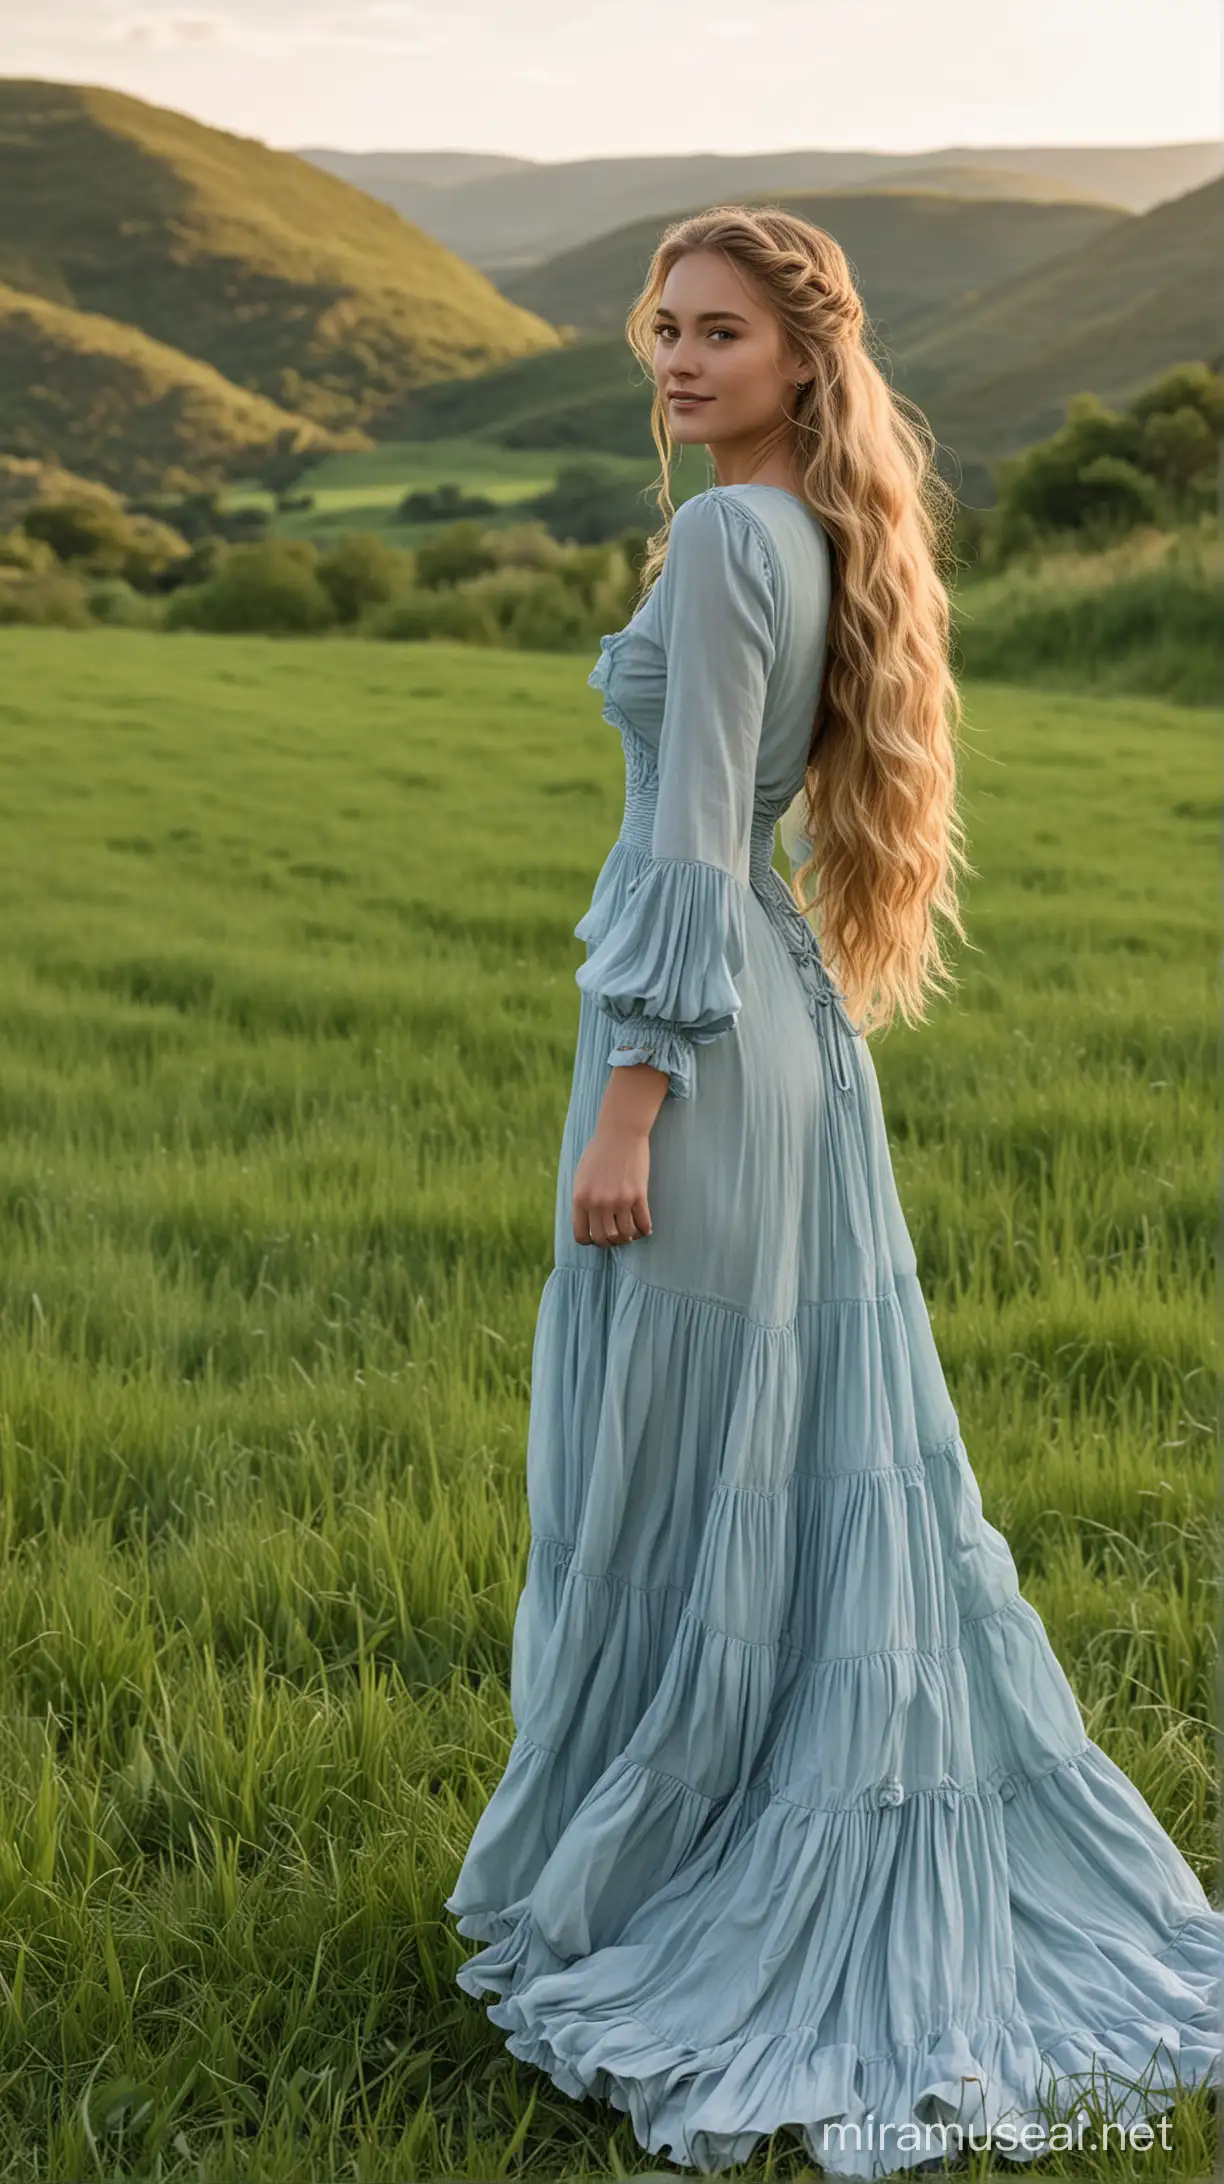 Full body view of a striking young female in early 20s with long voluminous golden hair that is partially braided back, wearing an elegant long-sleeved soft blue flowing ruffled gown, standing in a lush green field with grassy hills in background